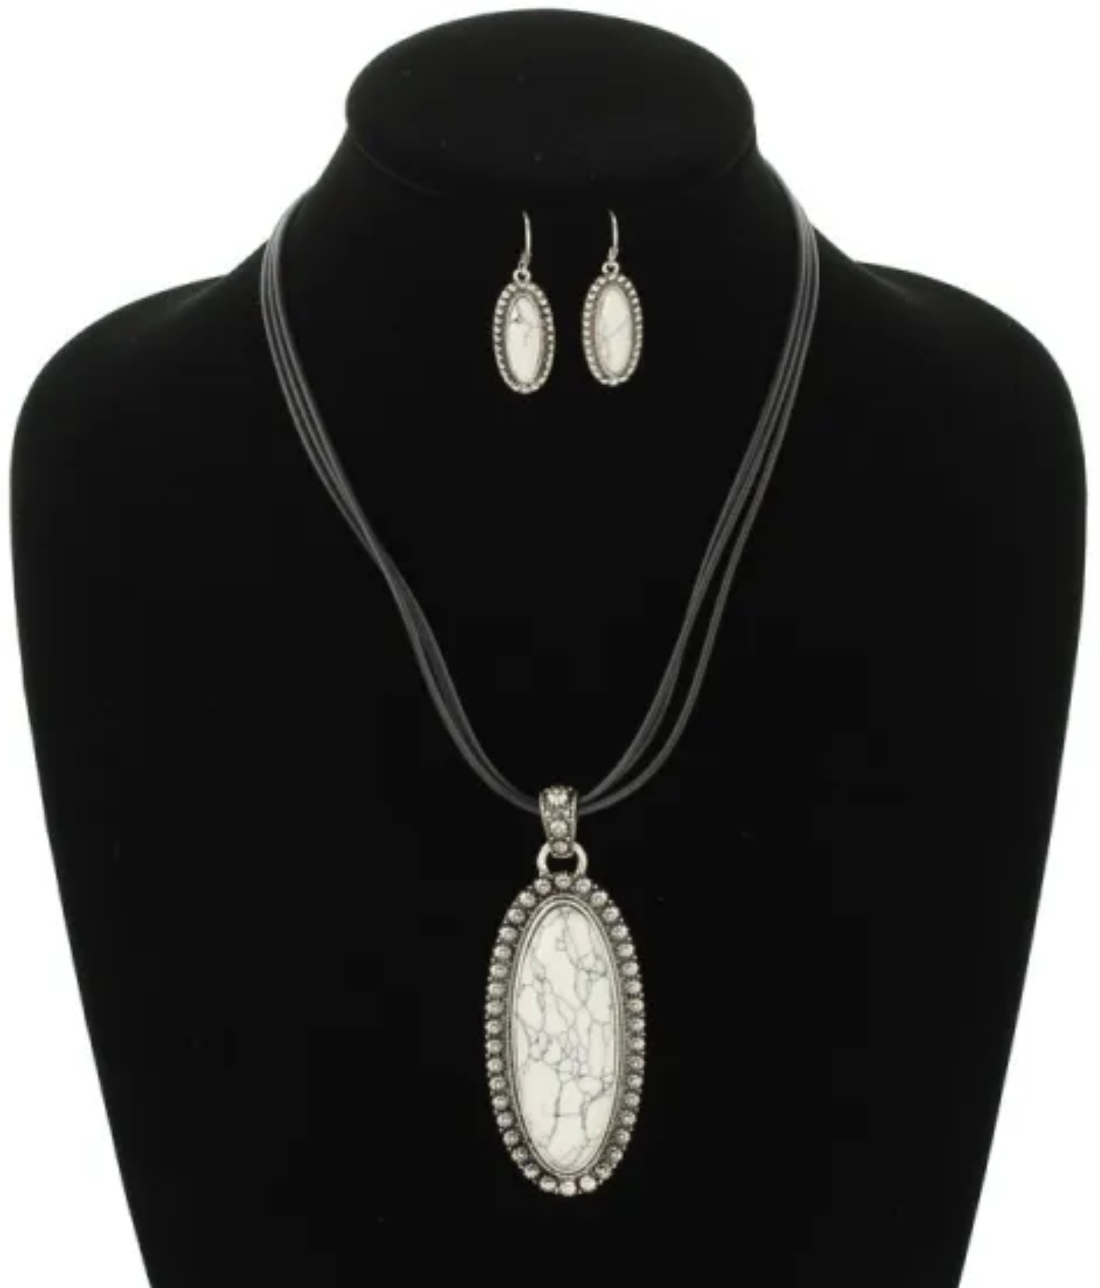 Navajo Style Leather Necklace Set